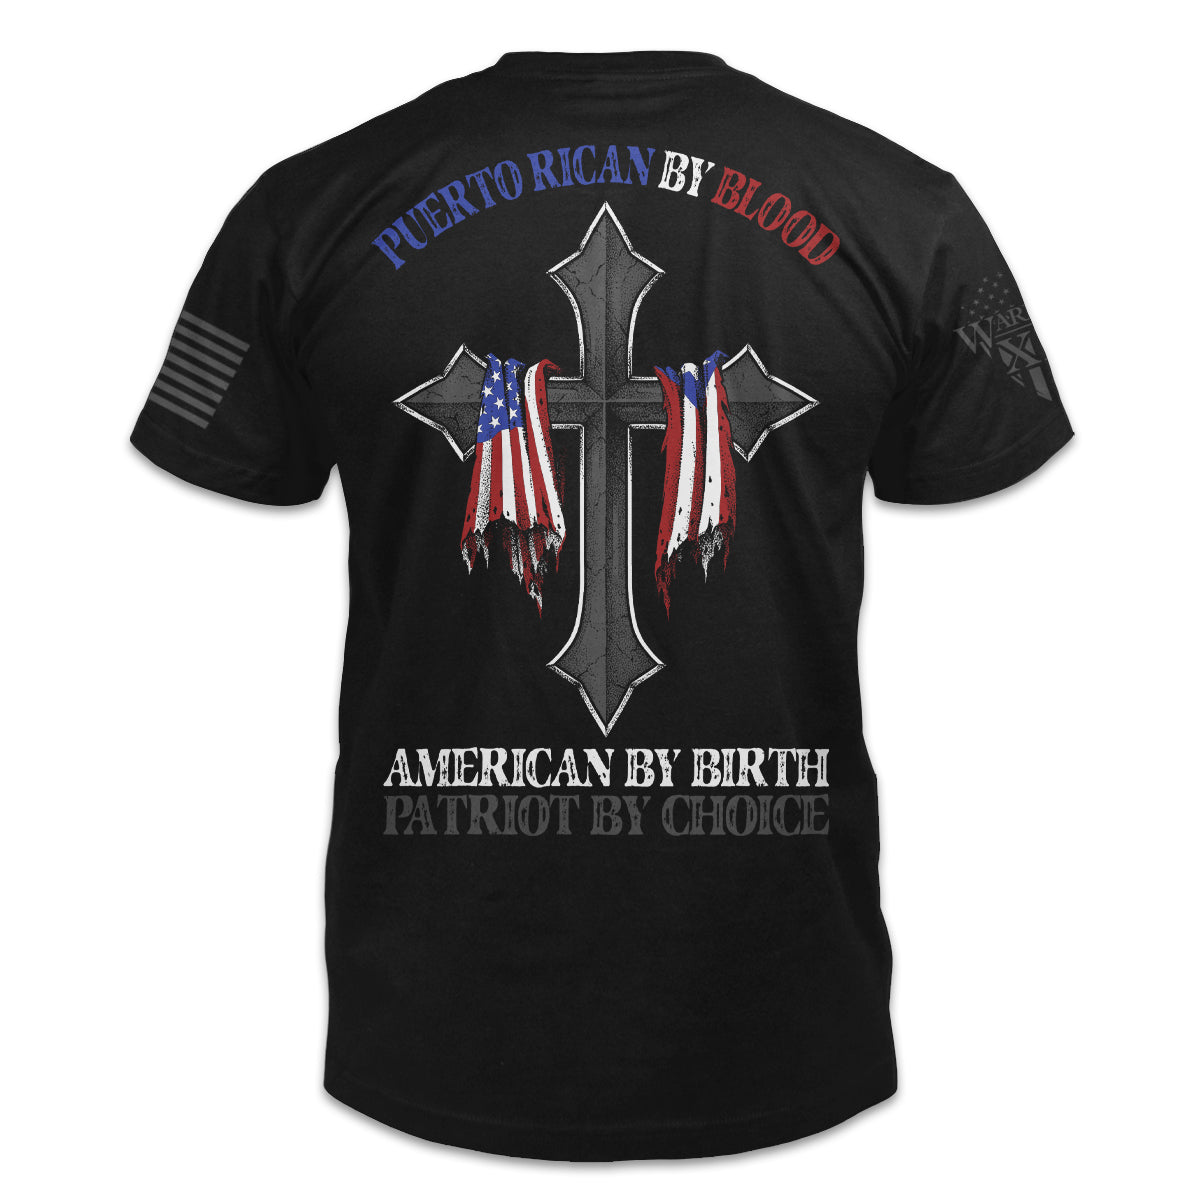 Puerto Rican By Blood Shirt